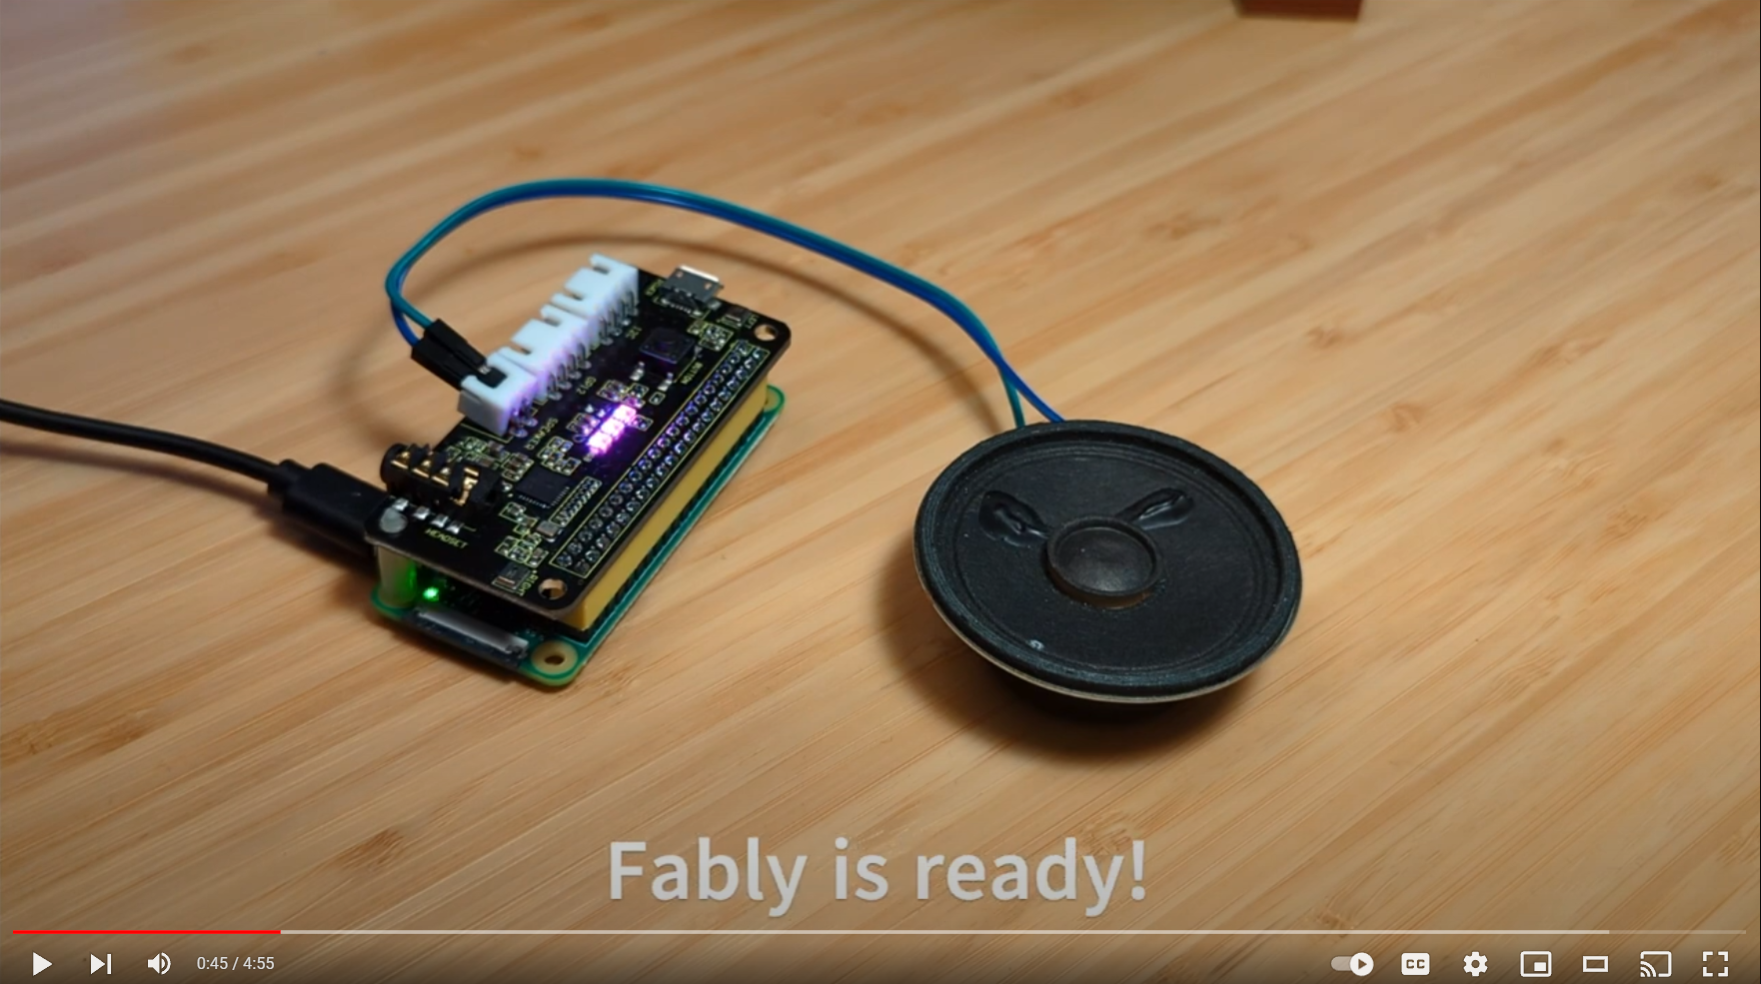 Fably running on a Raspberry PI Zero 2W